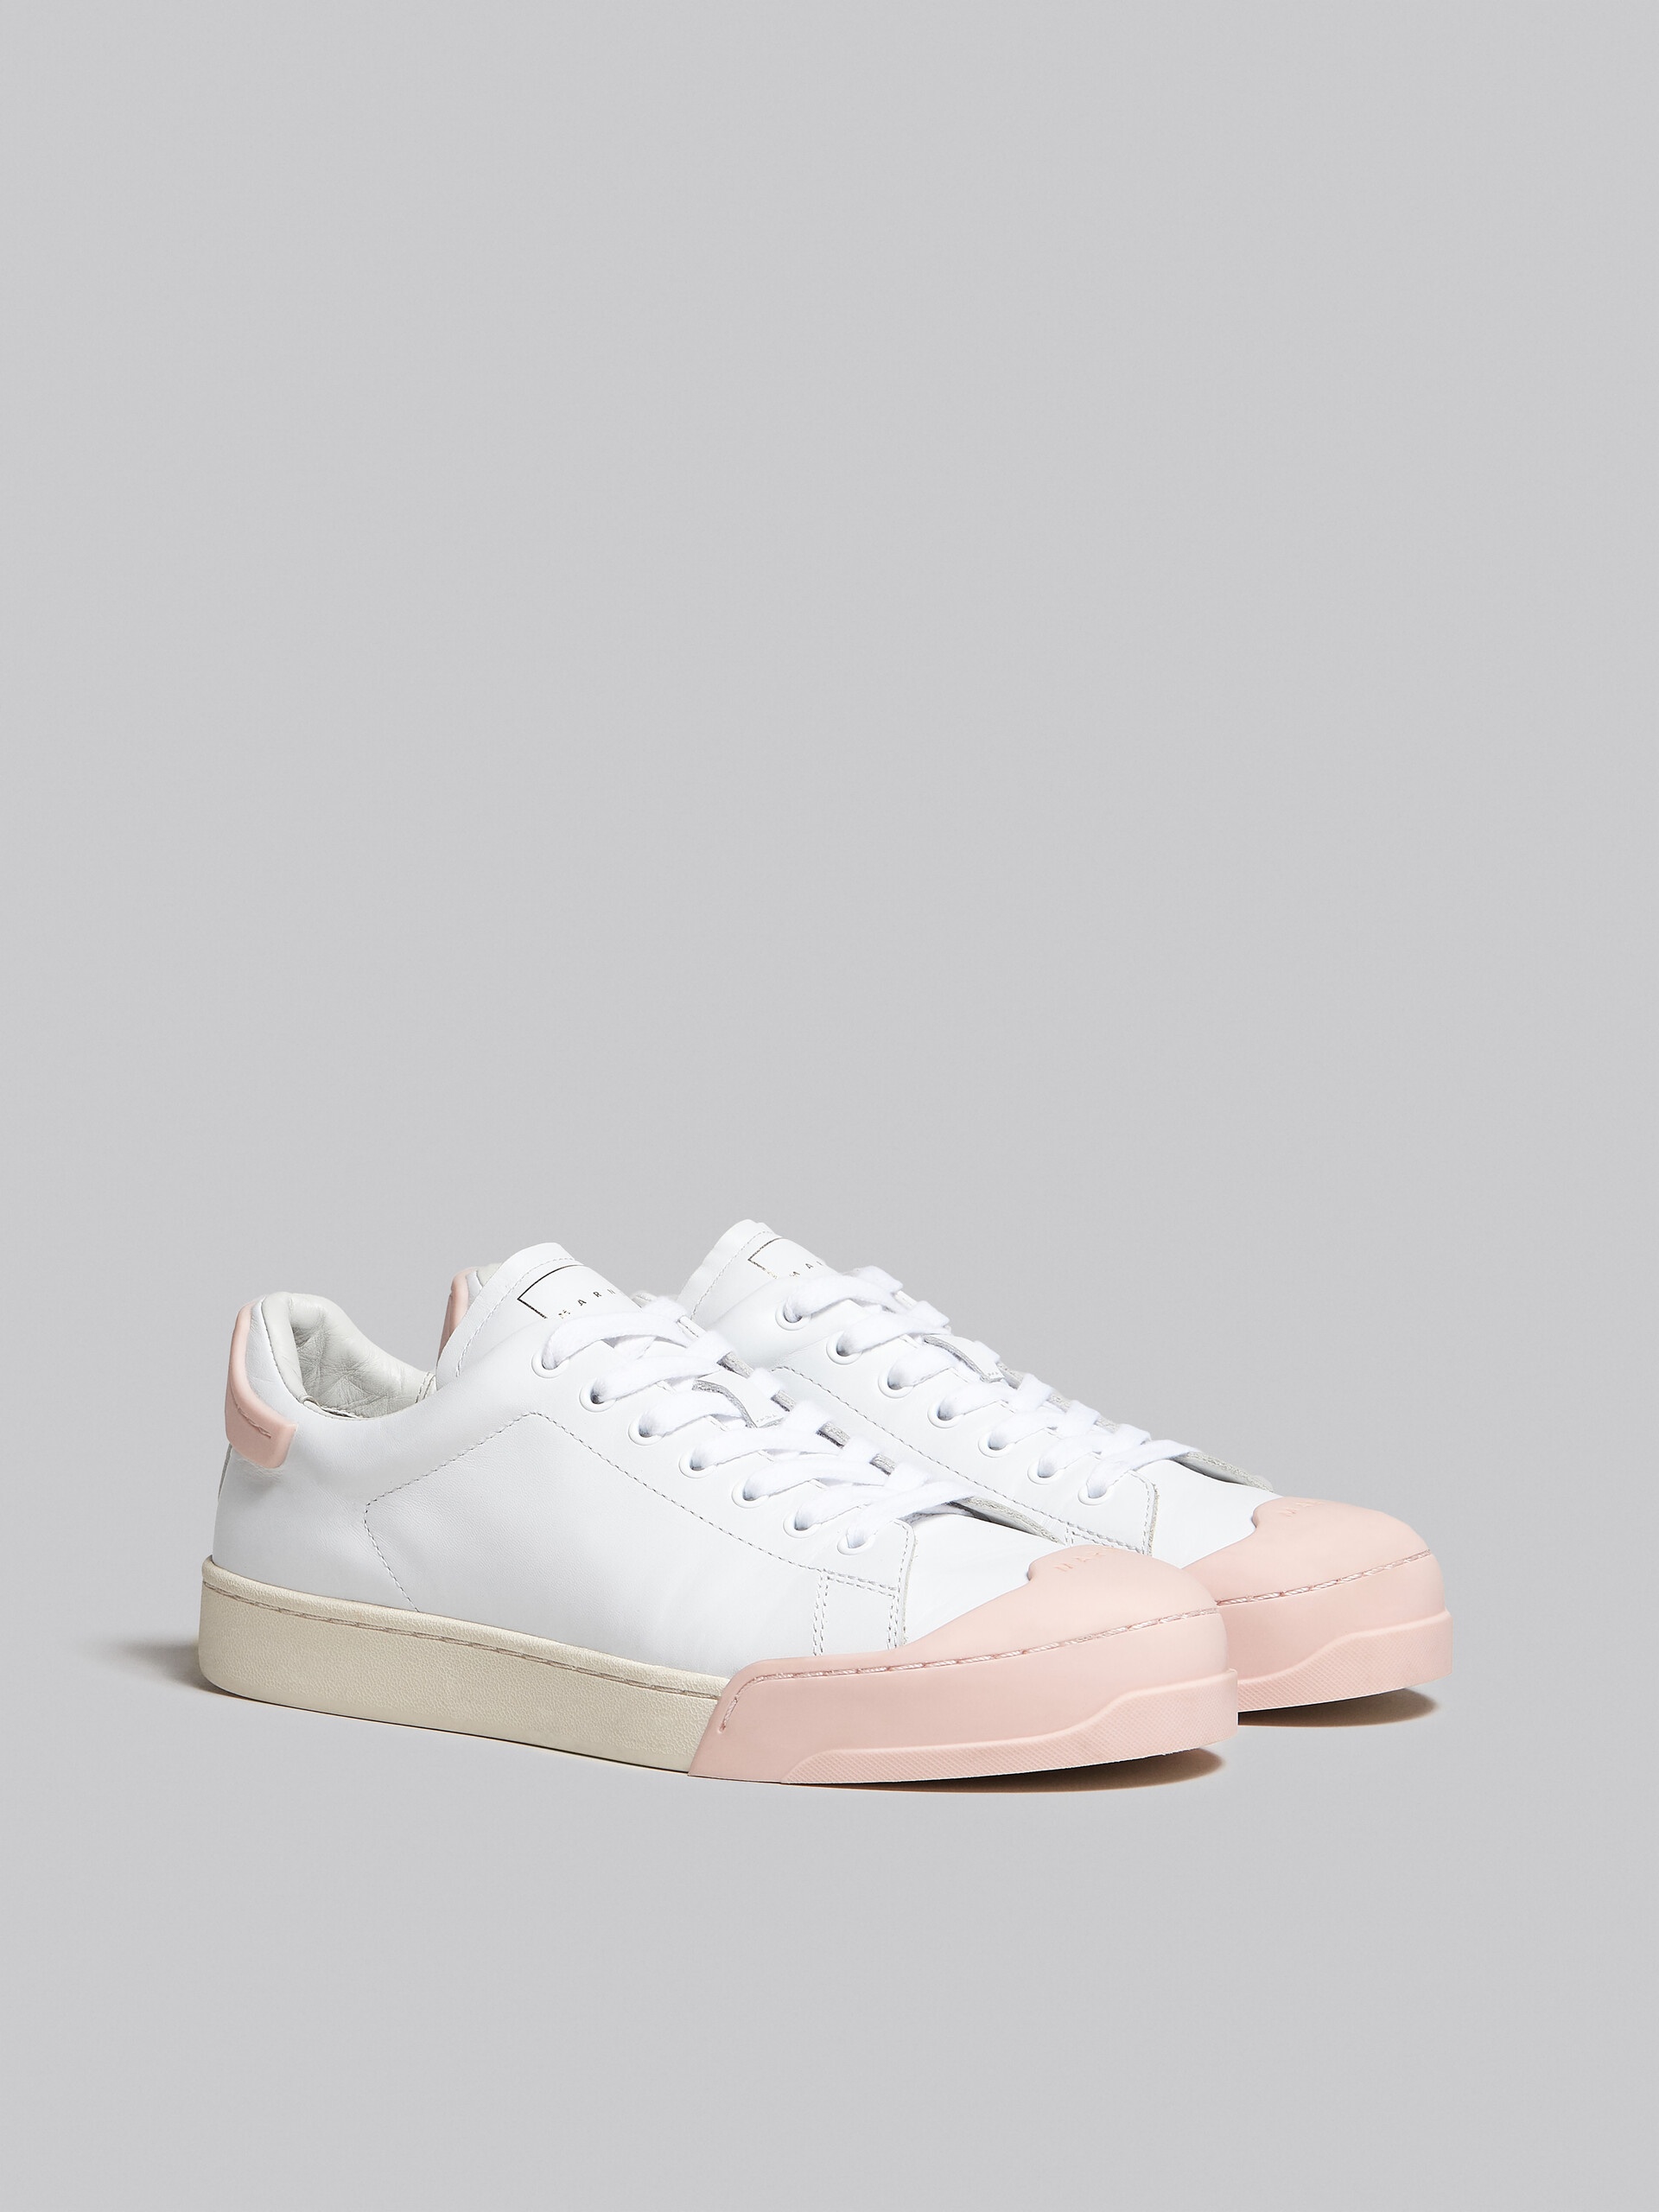 DADA BUMPER SNEAKER IN WHITE AND PINK LEATHER - 2